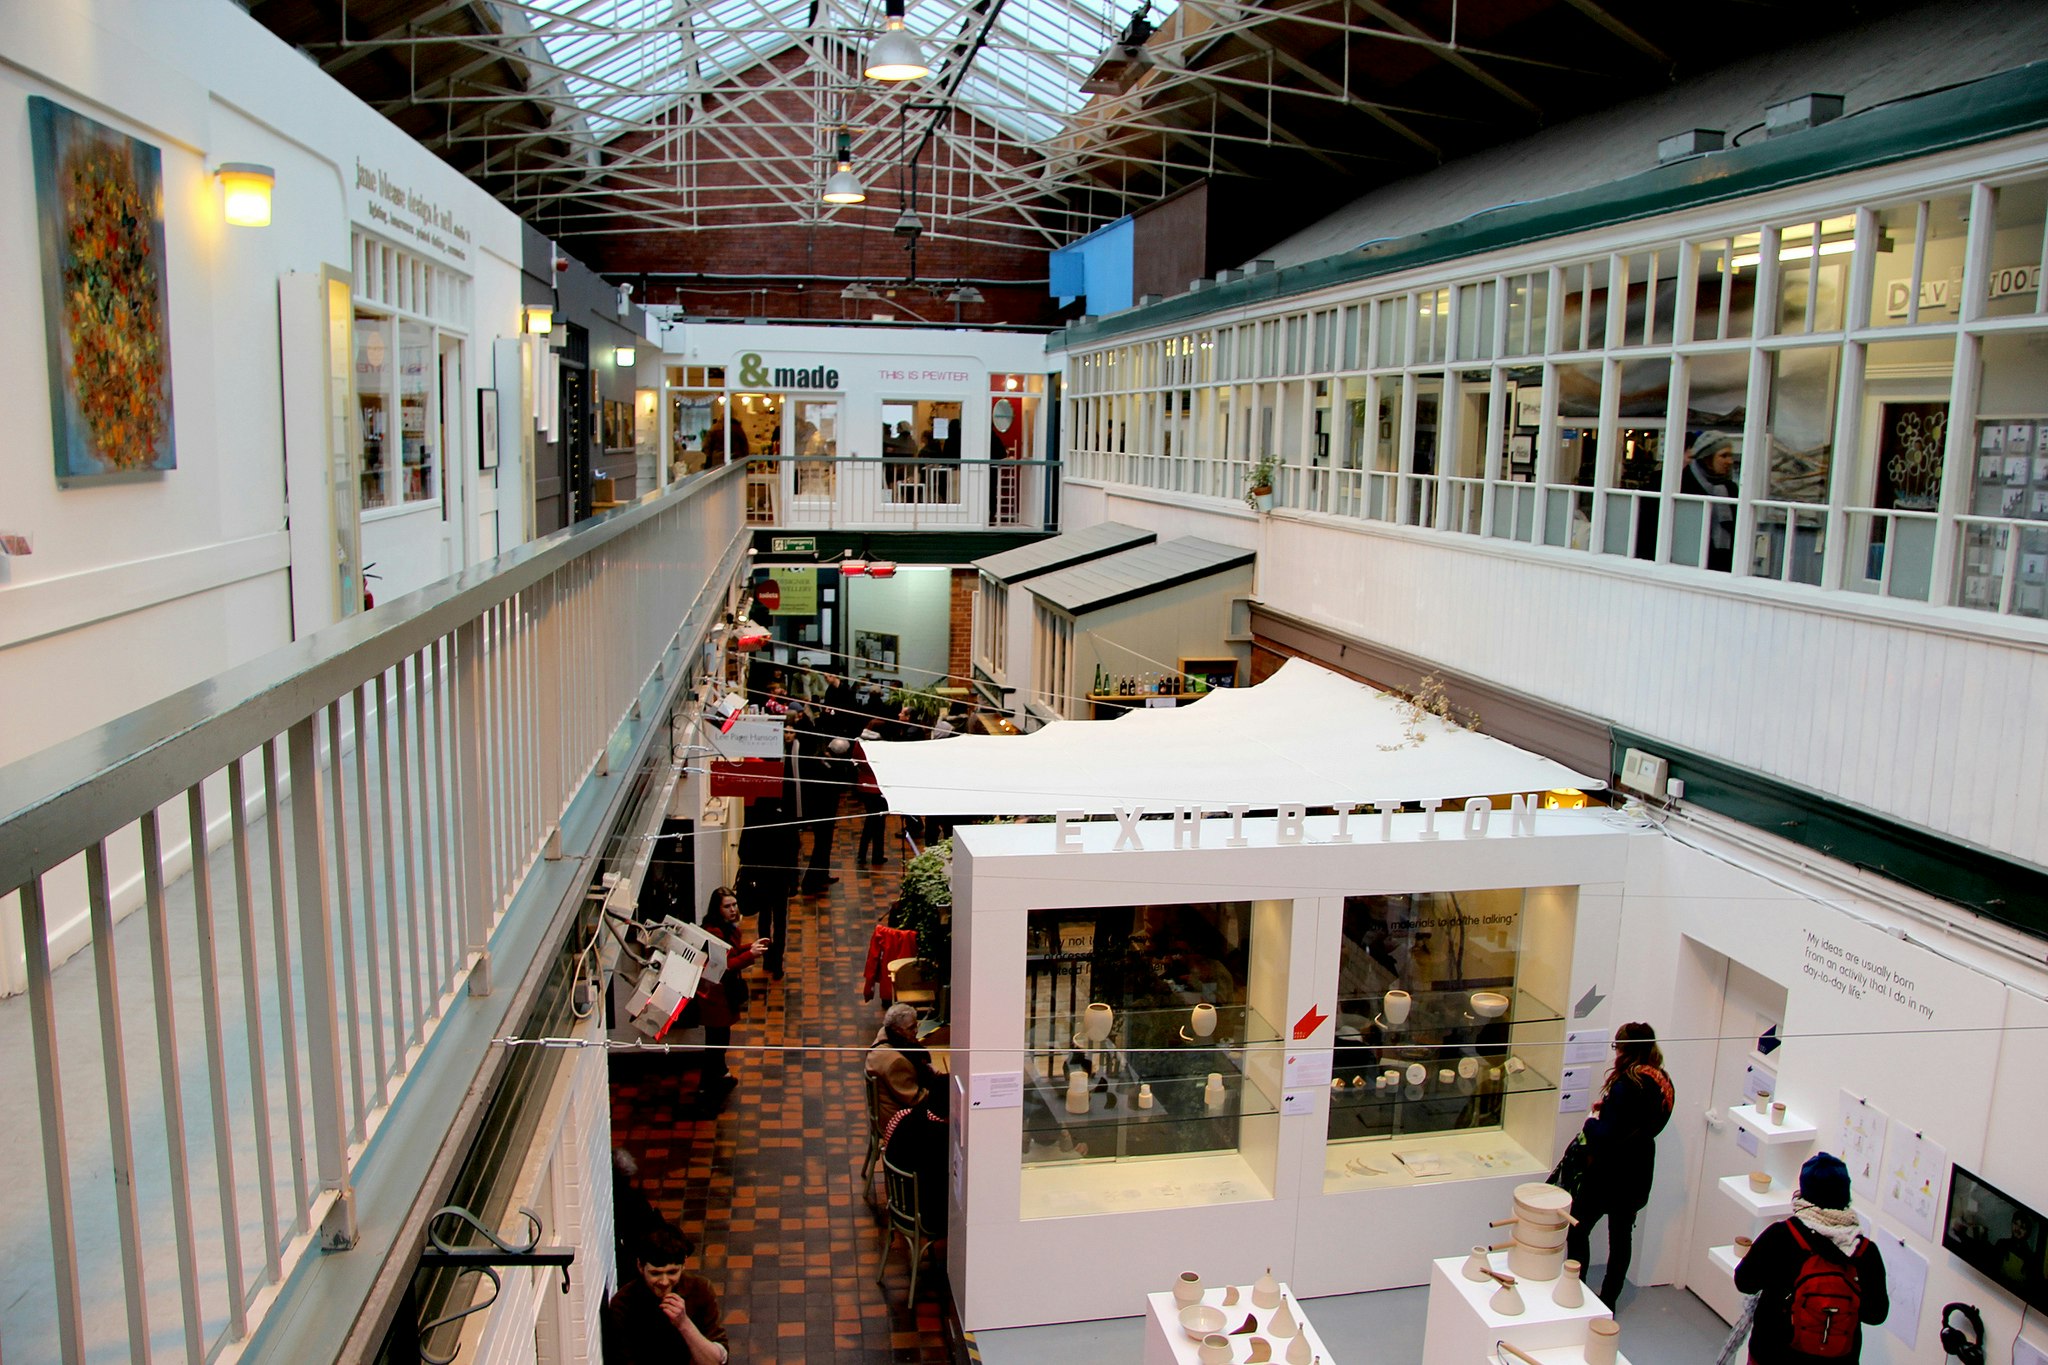 Creative Conference Venues in Manchester - Manchester Craft and Design Centre